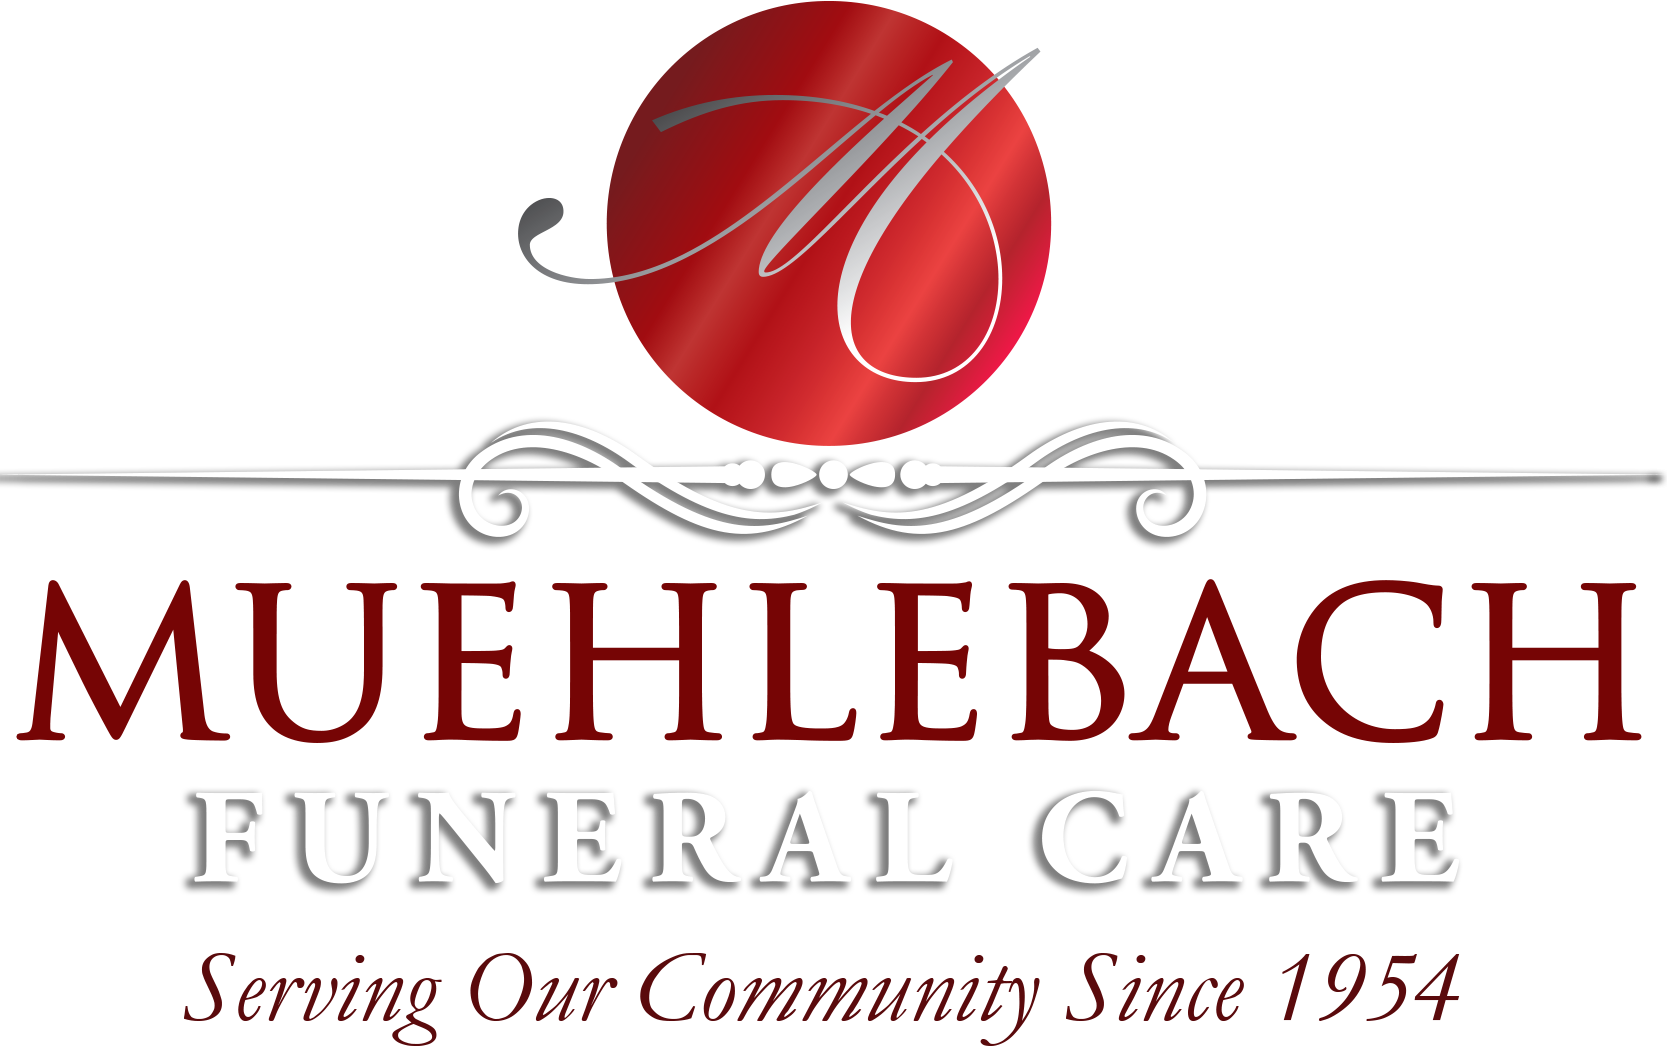 Muehlebach Funeral Care Logo